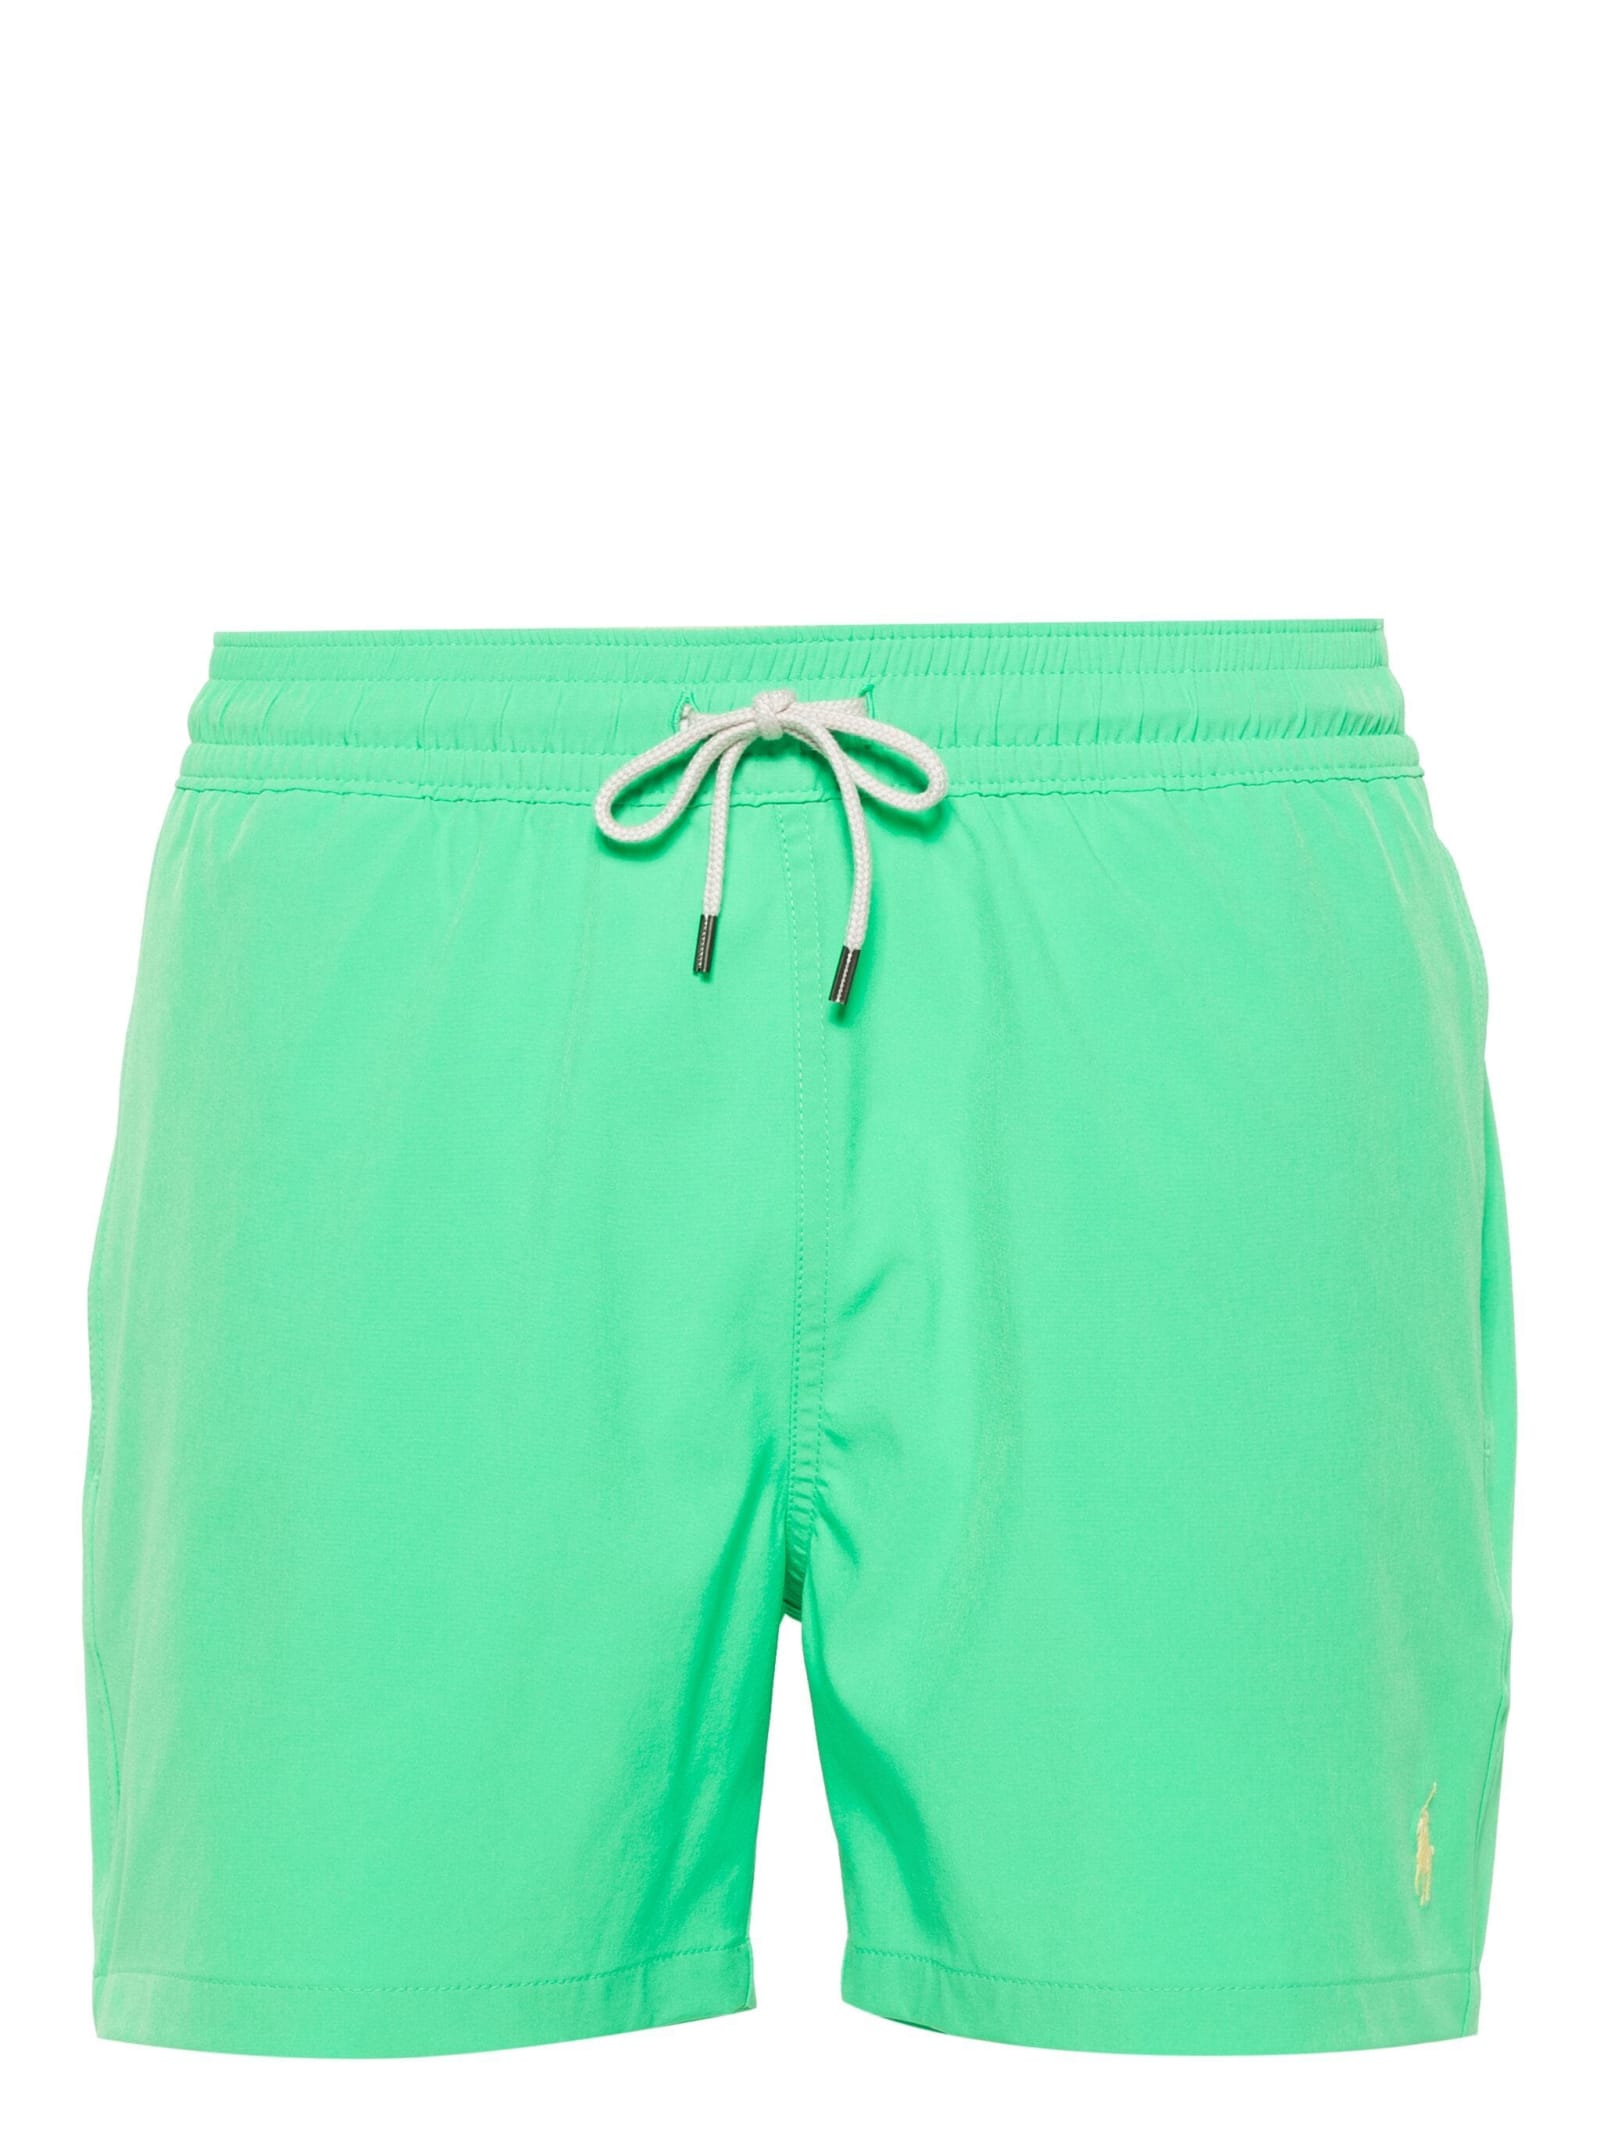 Ralph Lauren Green Swim Shorts With Embroidered Pony